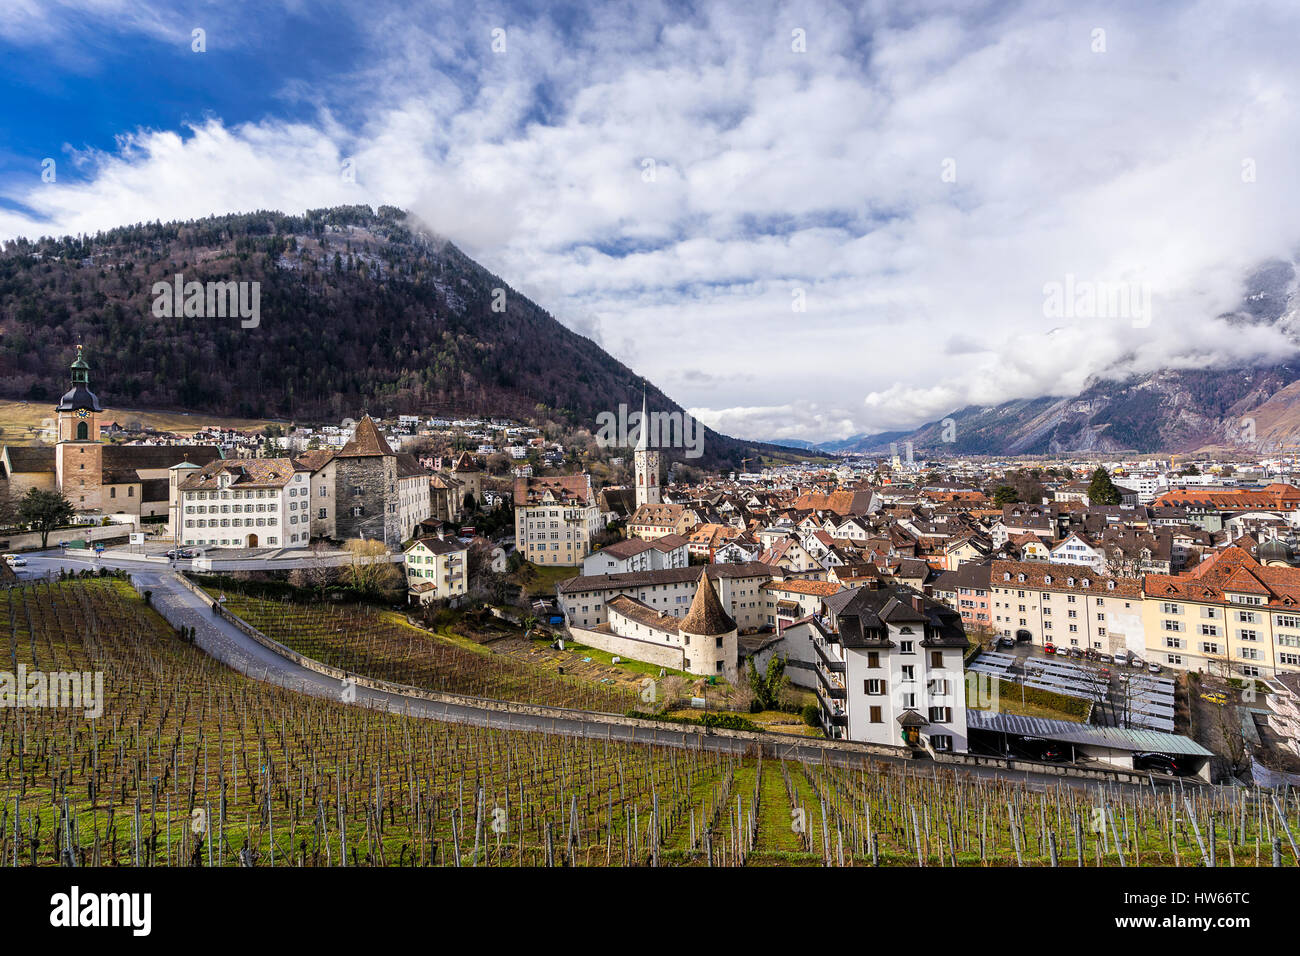 Looking across Chur in south east Switzerland Stock Photo